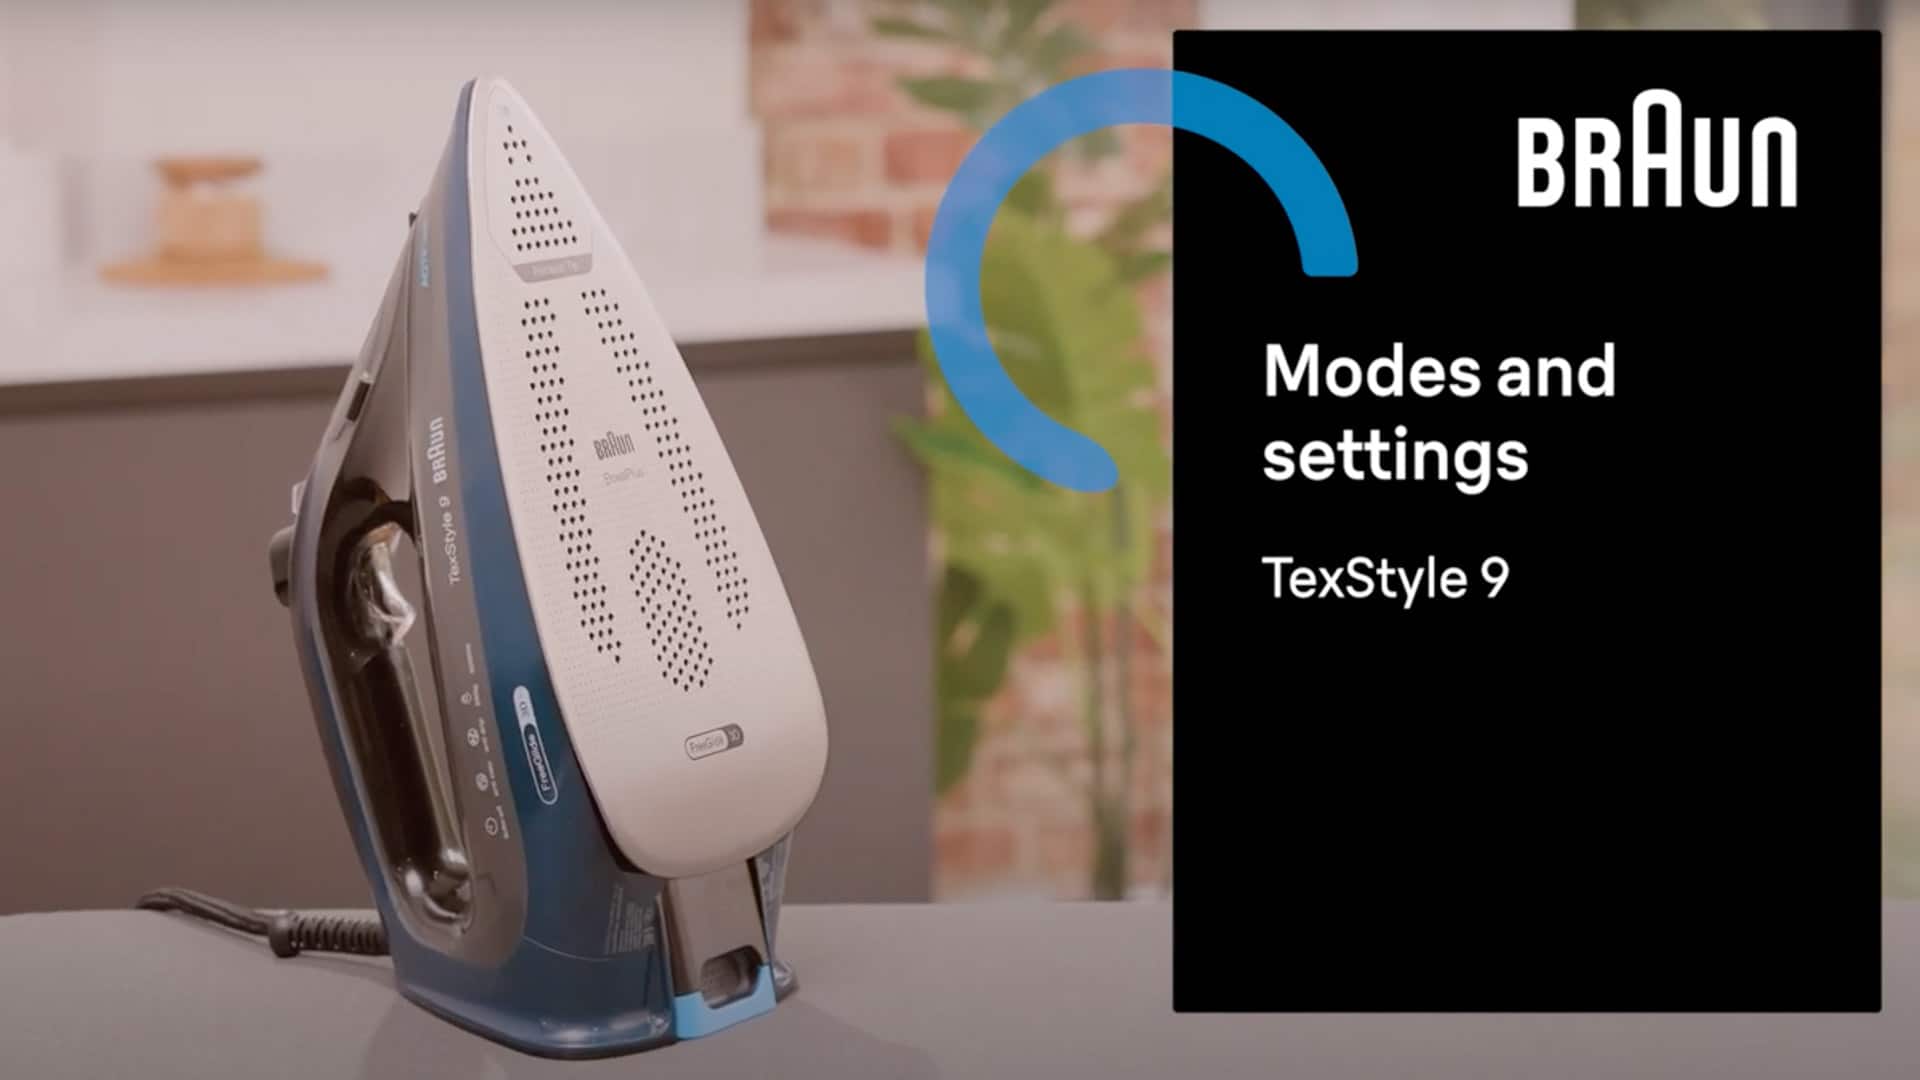 Braun TexStyle 9 How to – Modes and settings